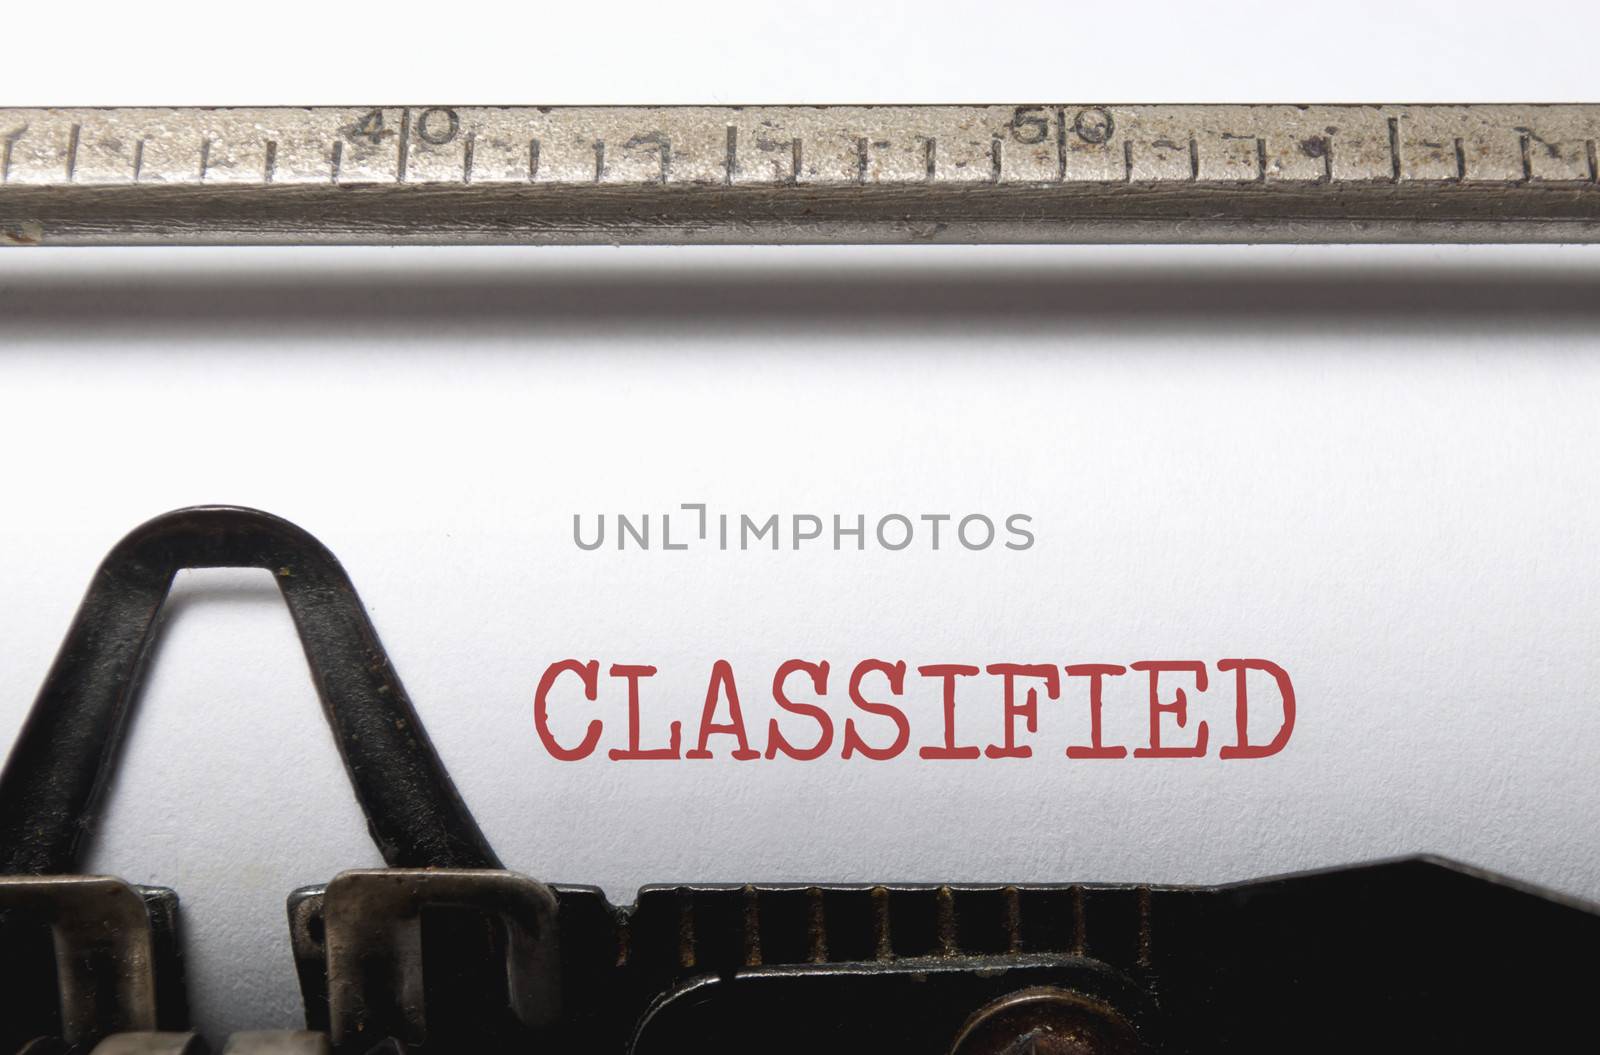 Classified compiled using a vintage typewriter